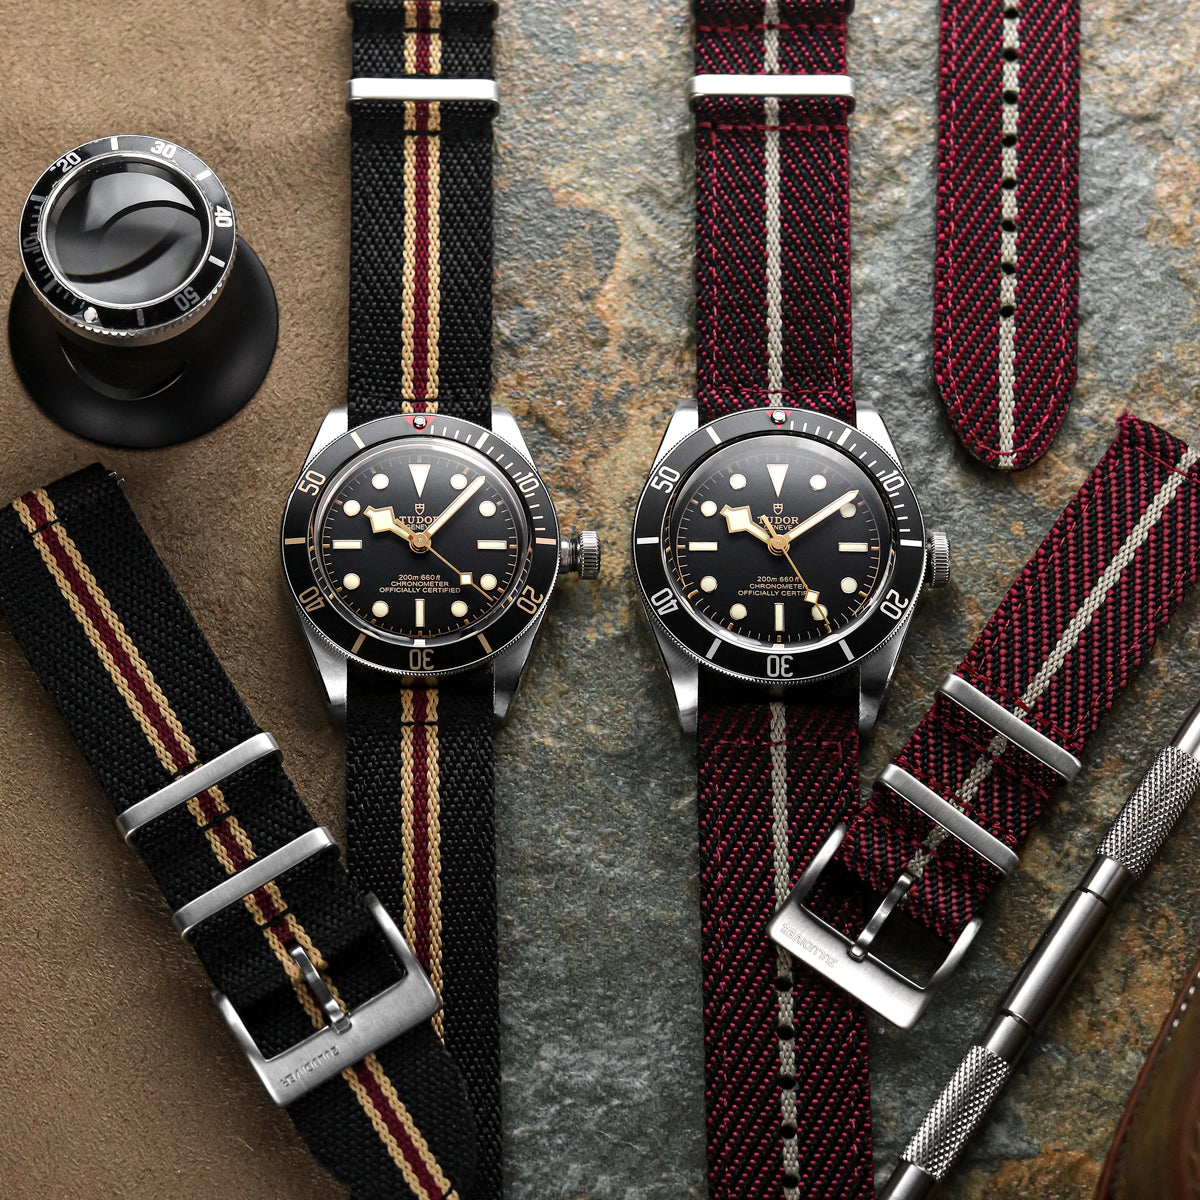 ZULUDIVER Seasalter Military Nylon Watch Strap - Black/Brown/Red - additional image 2